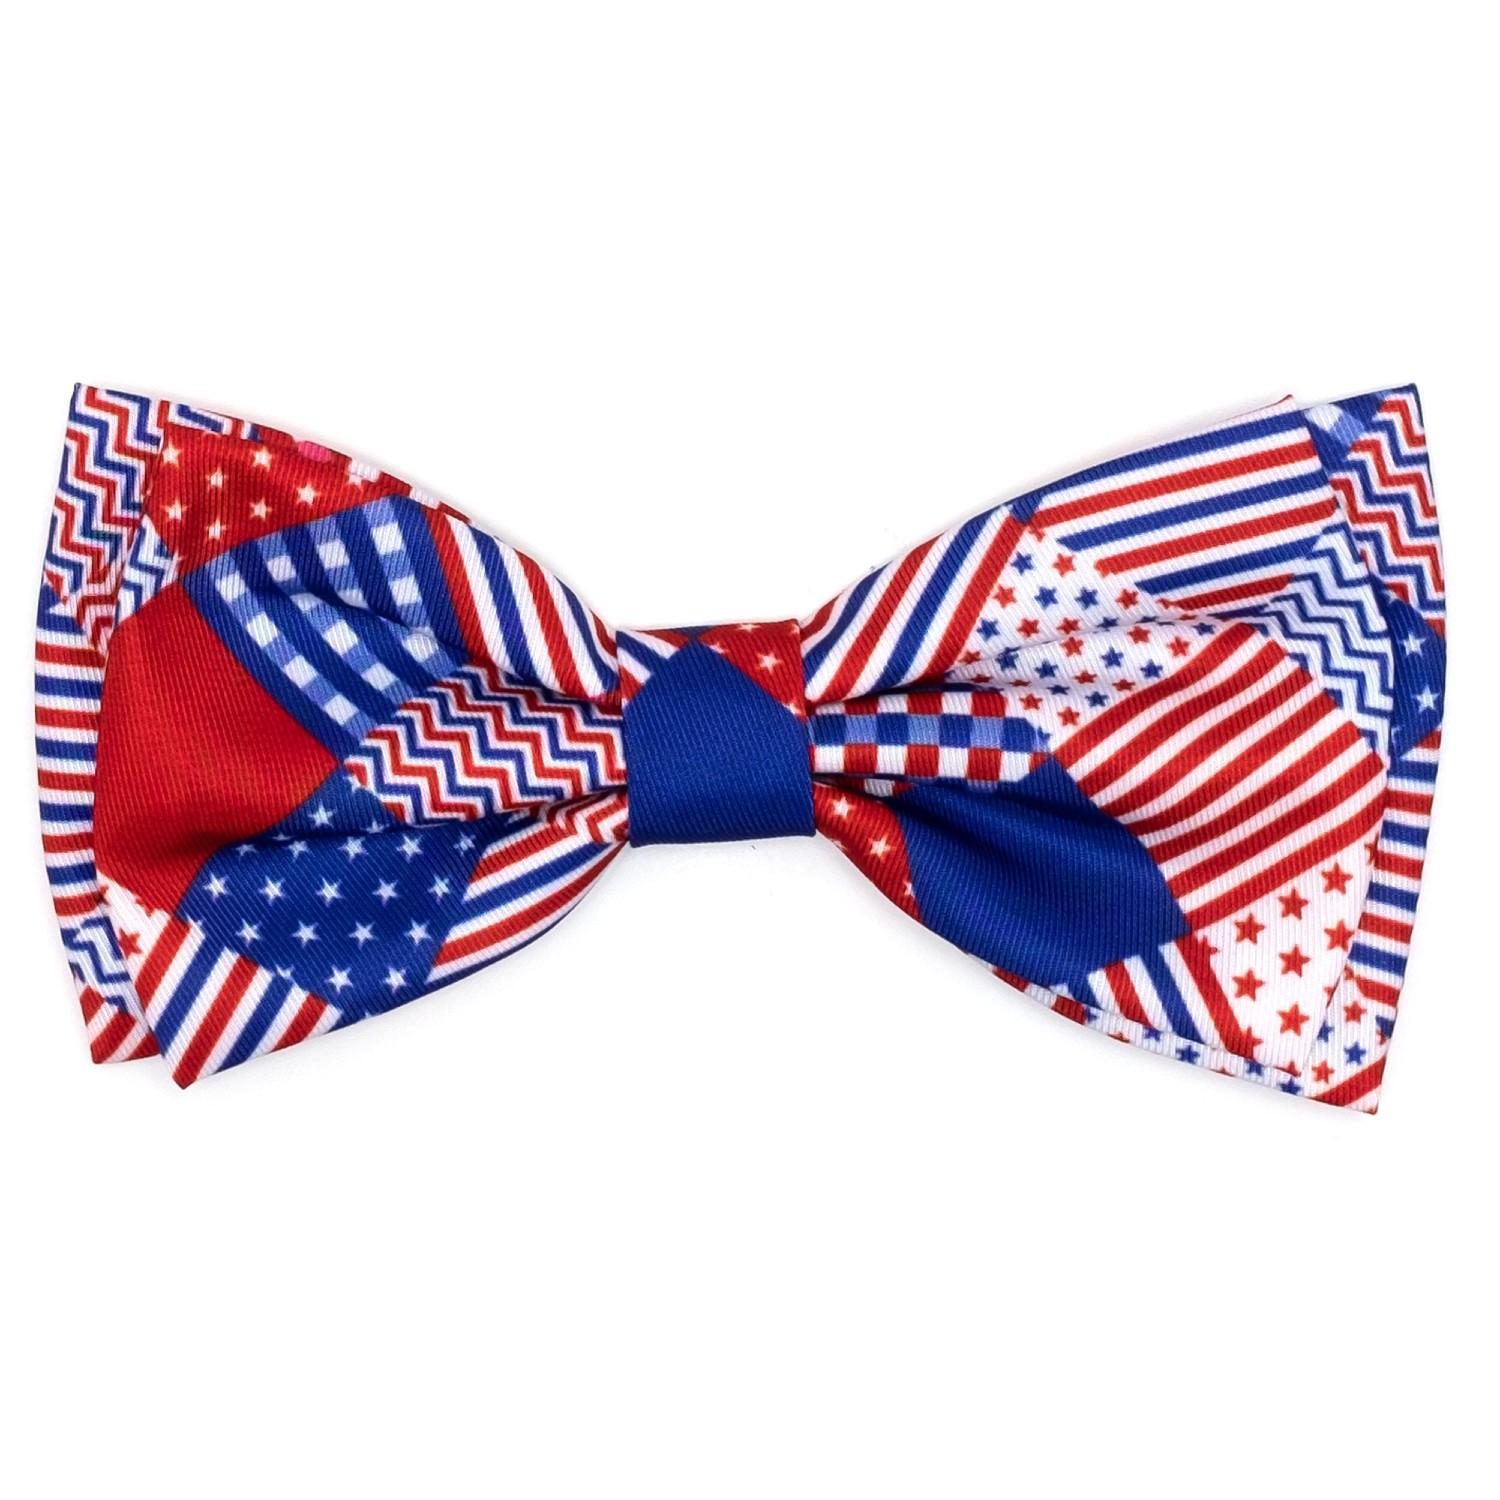 Worthy Dog Americana Dog and Cat Bow Tie Collar Attachment